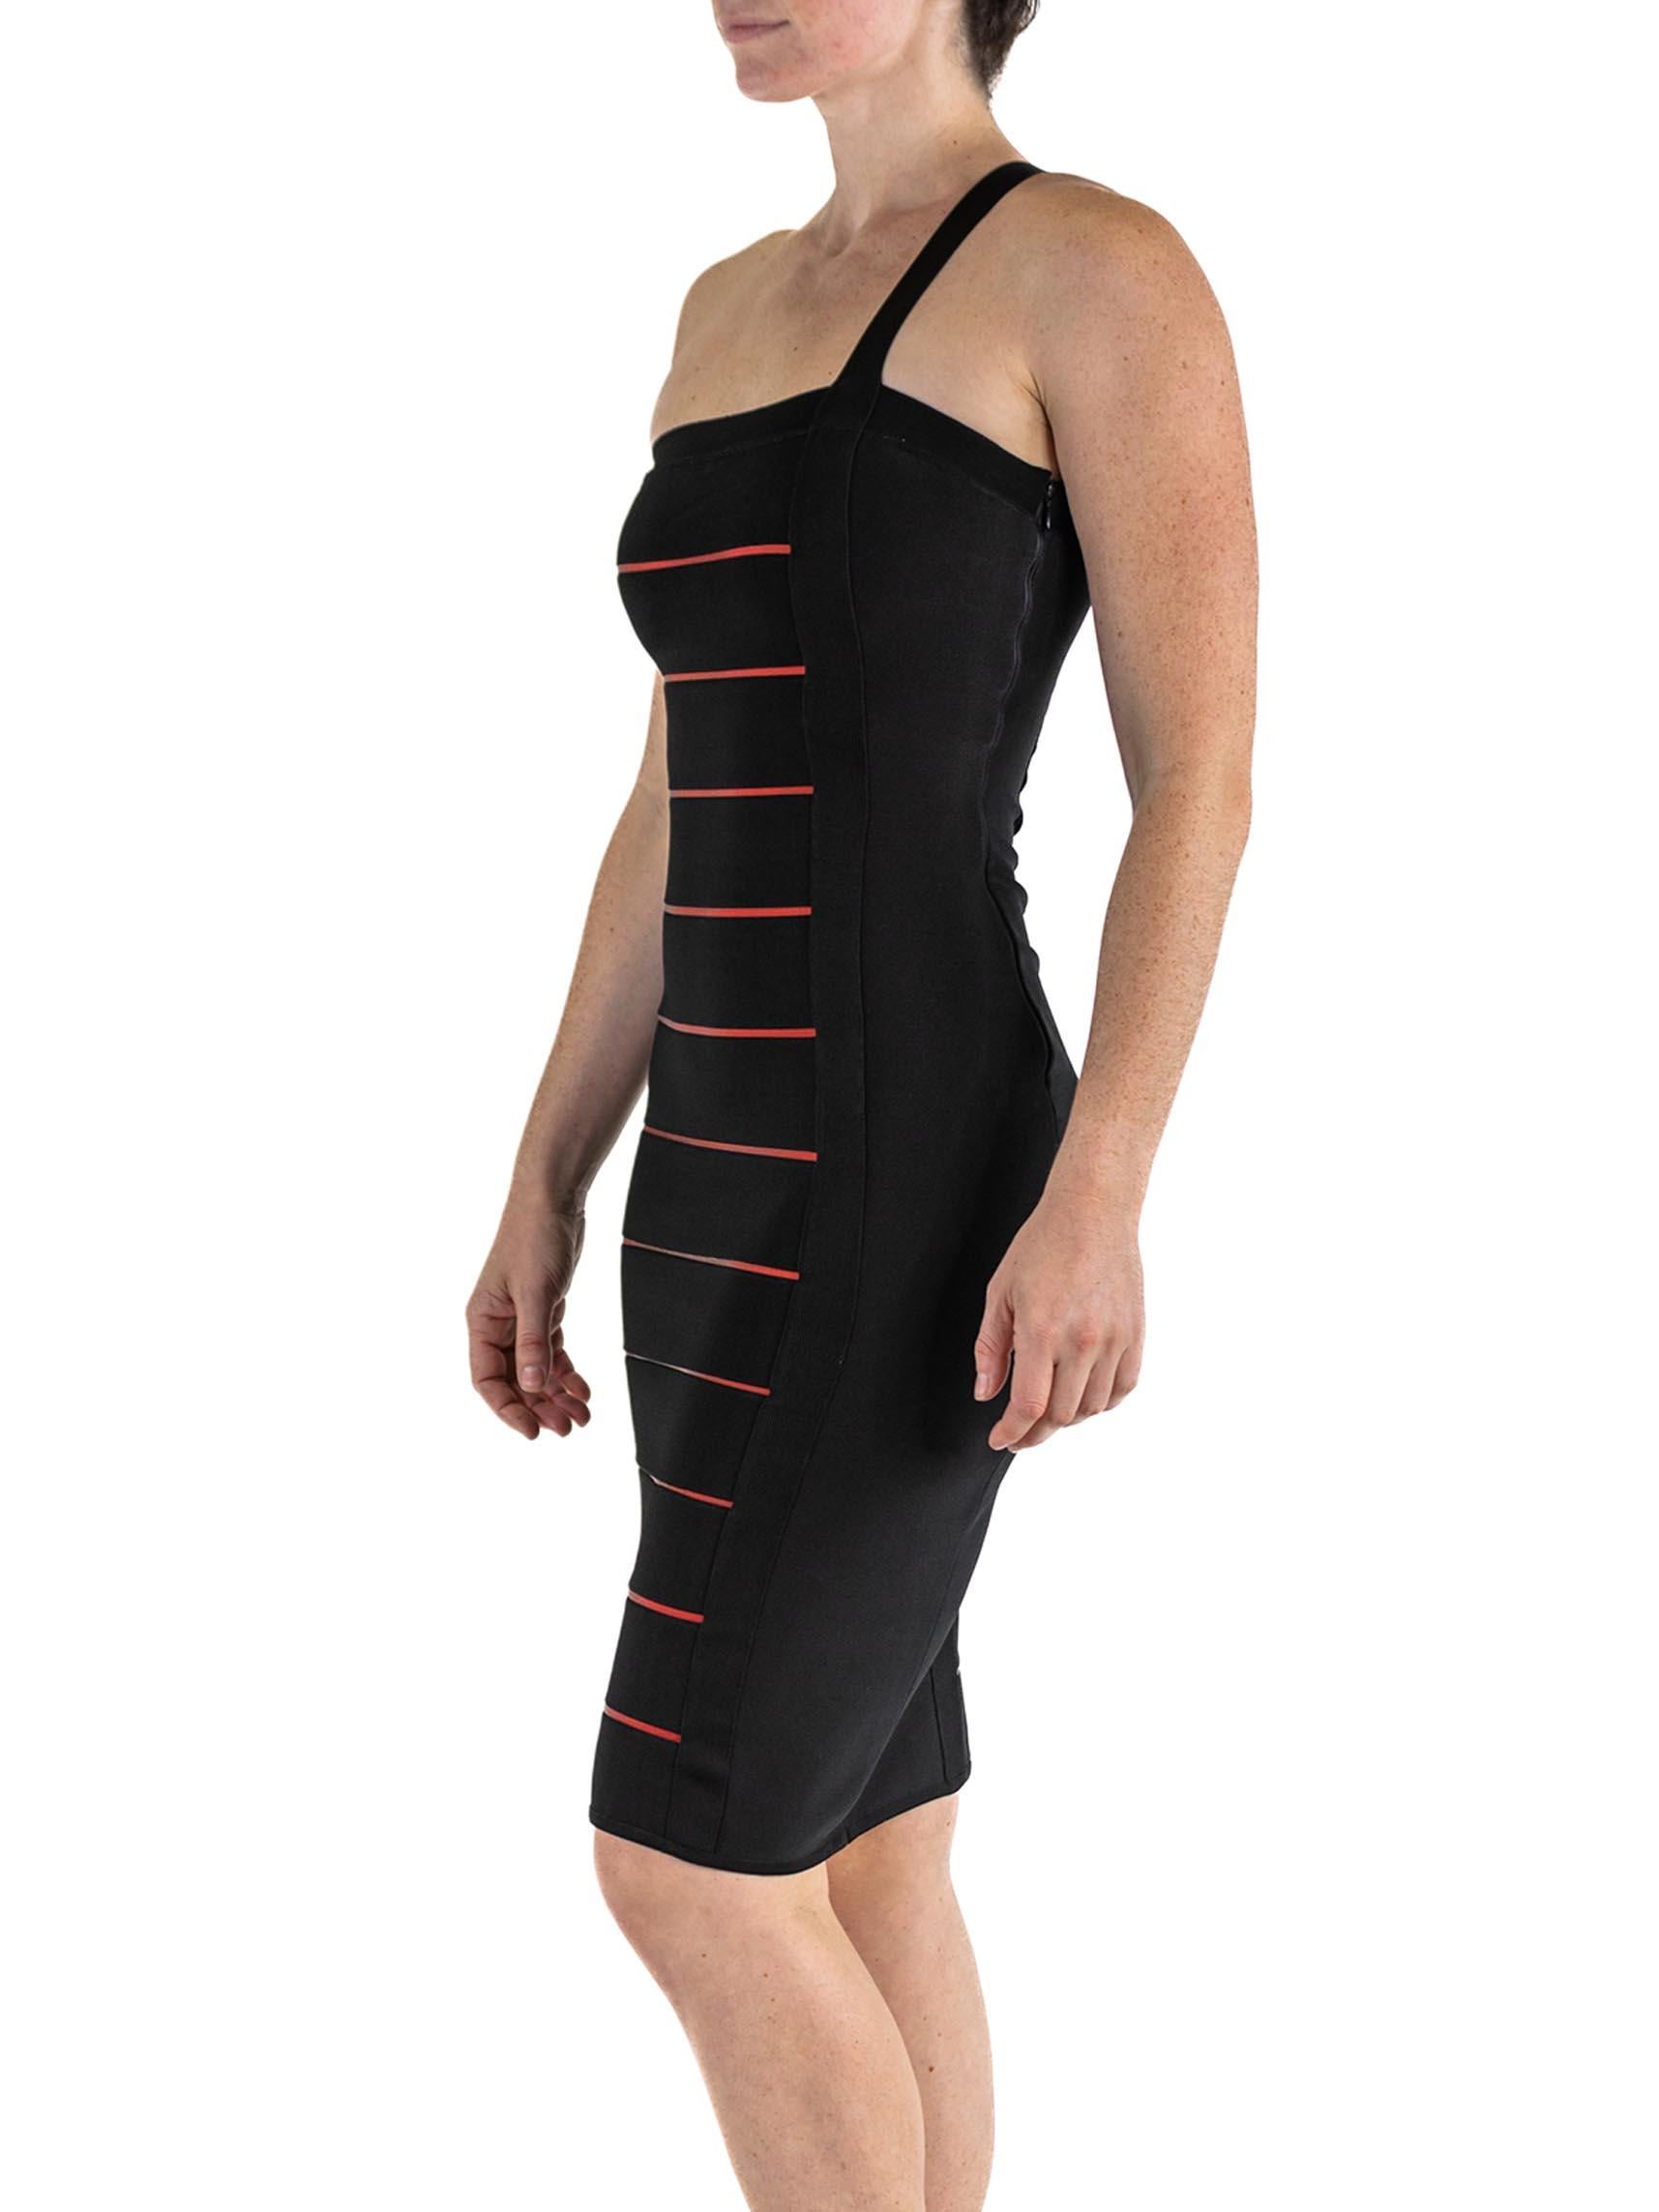 1990S HERVE LEGER Black & Red Rayon Blend Body-Con Cocktail Dress For Sale 1